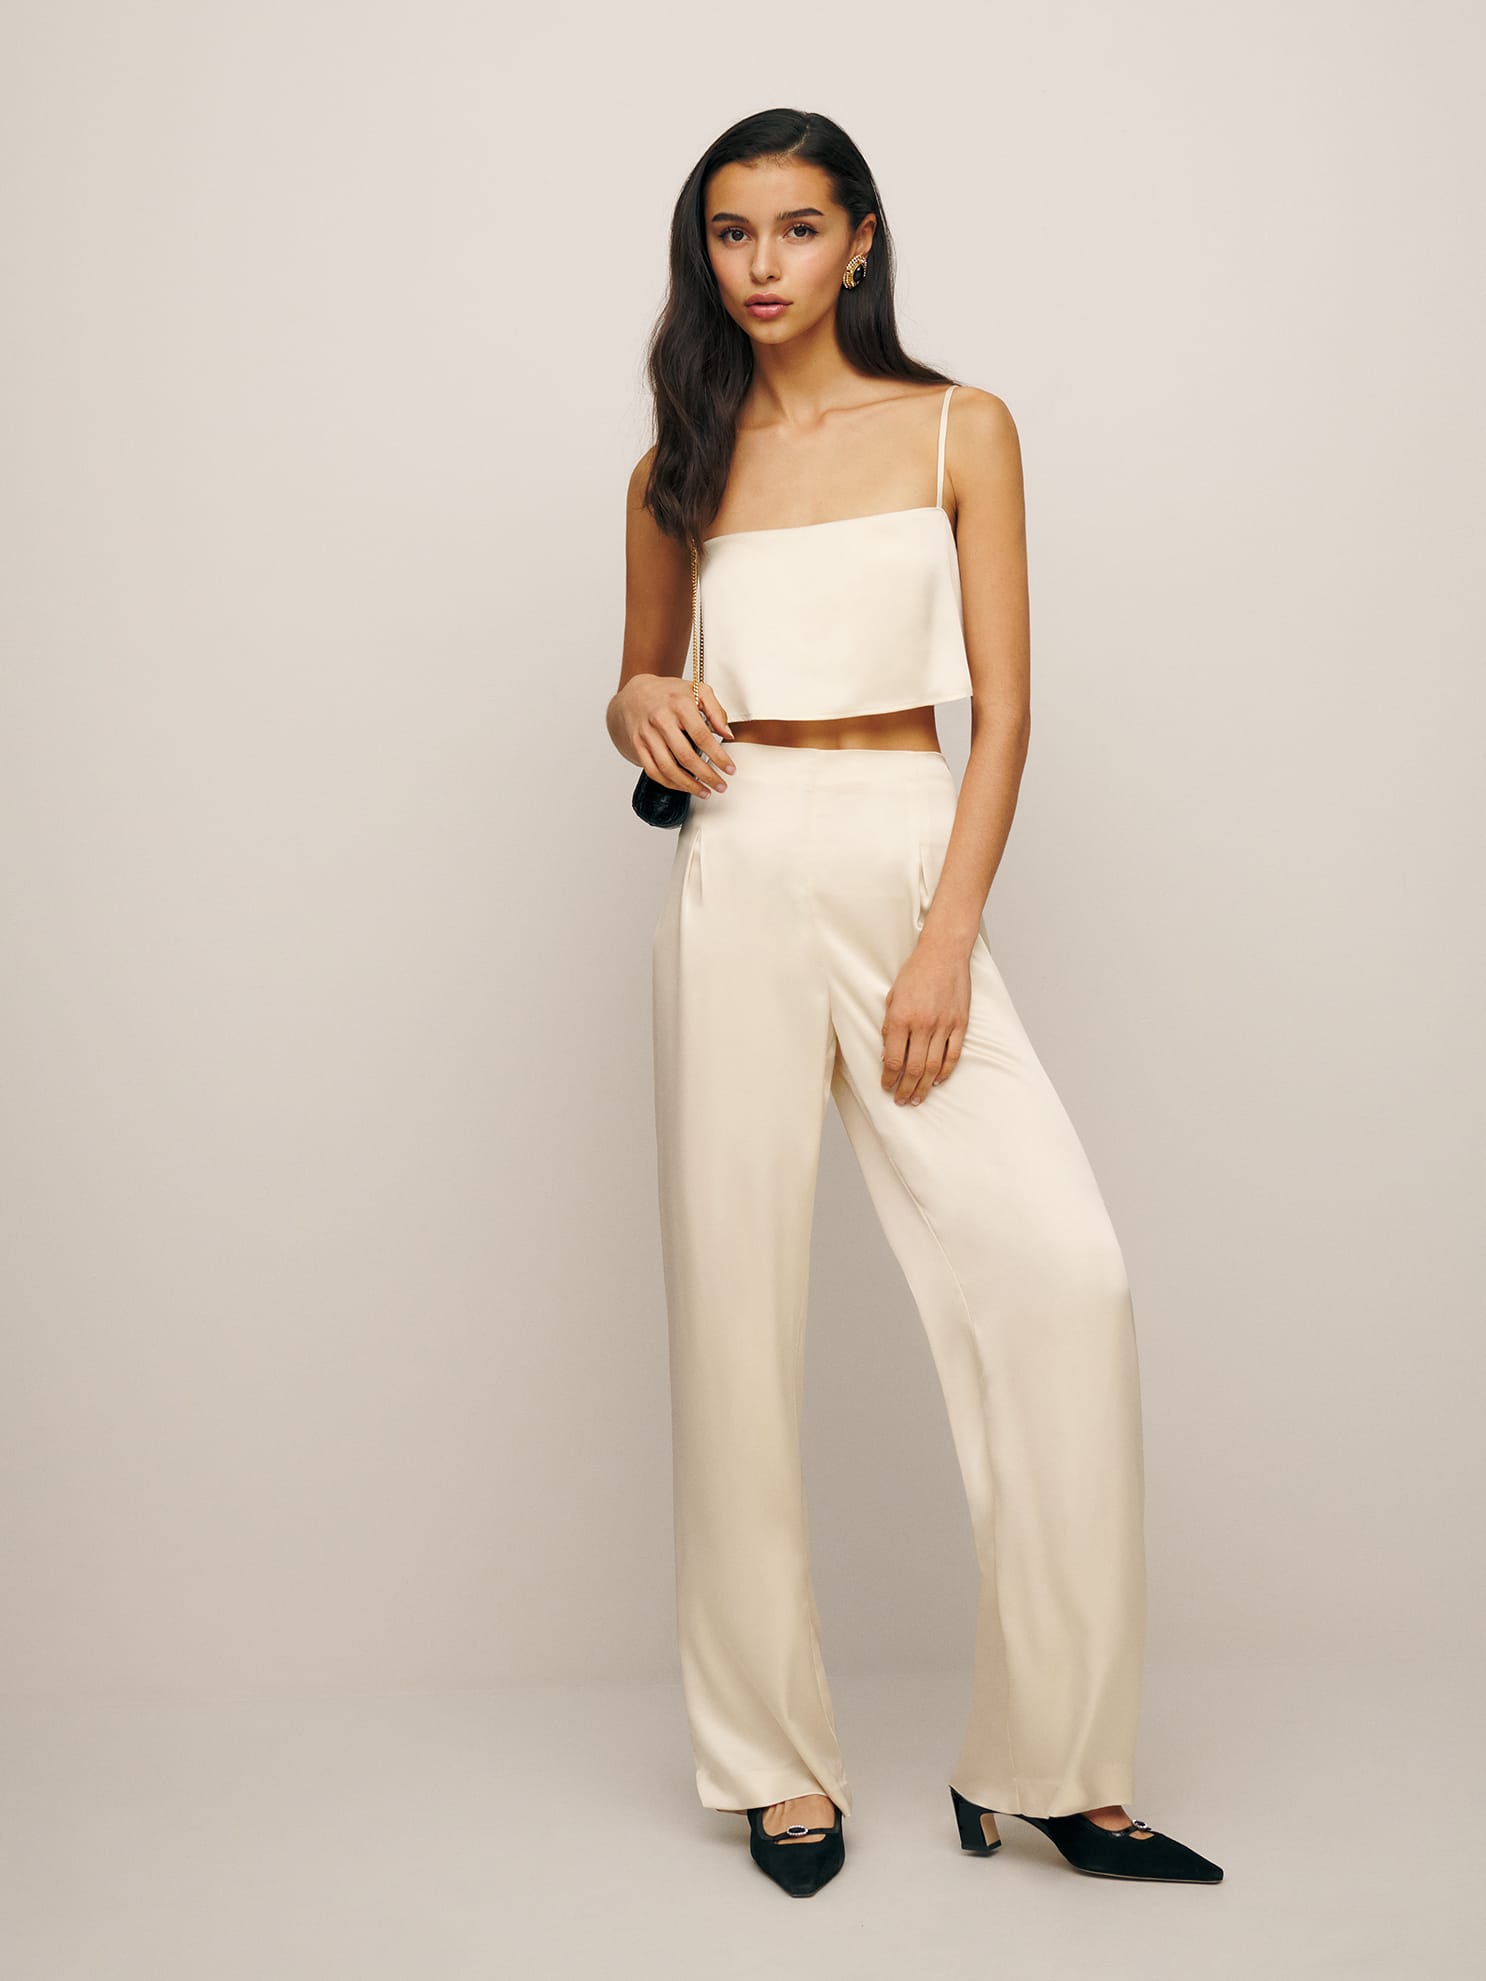 Reformation Cleo Satin Two Piece In Almond